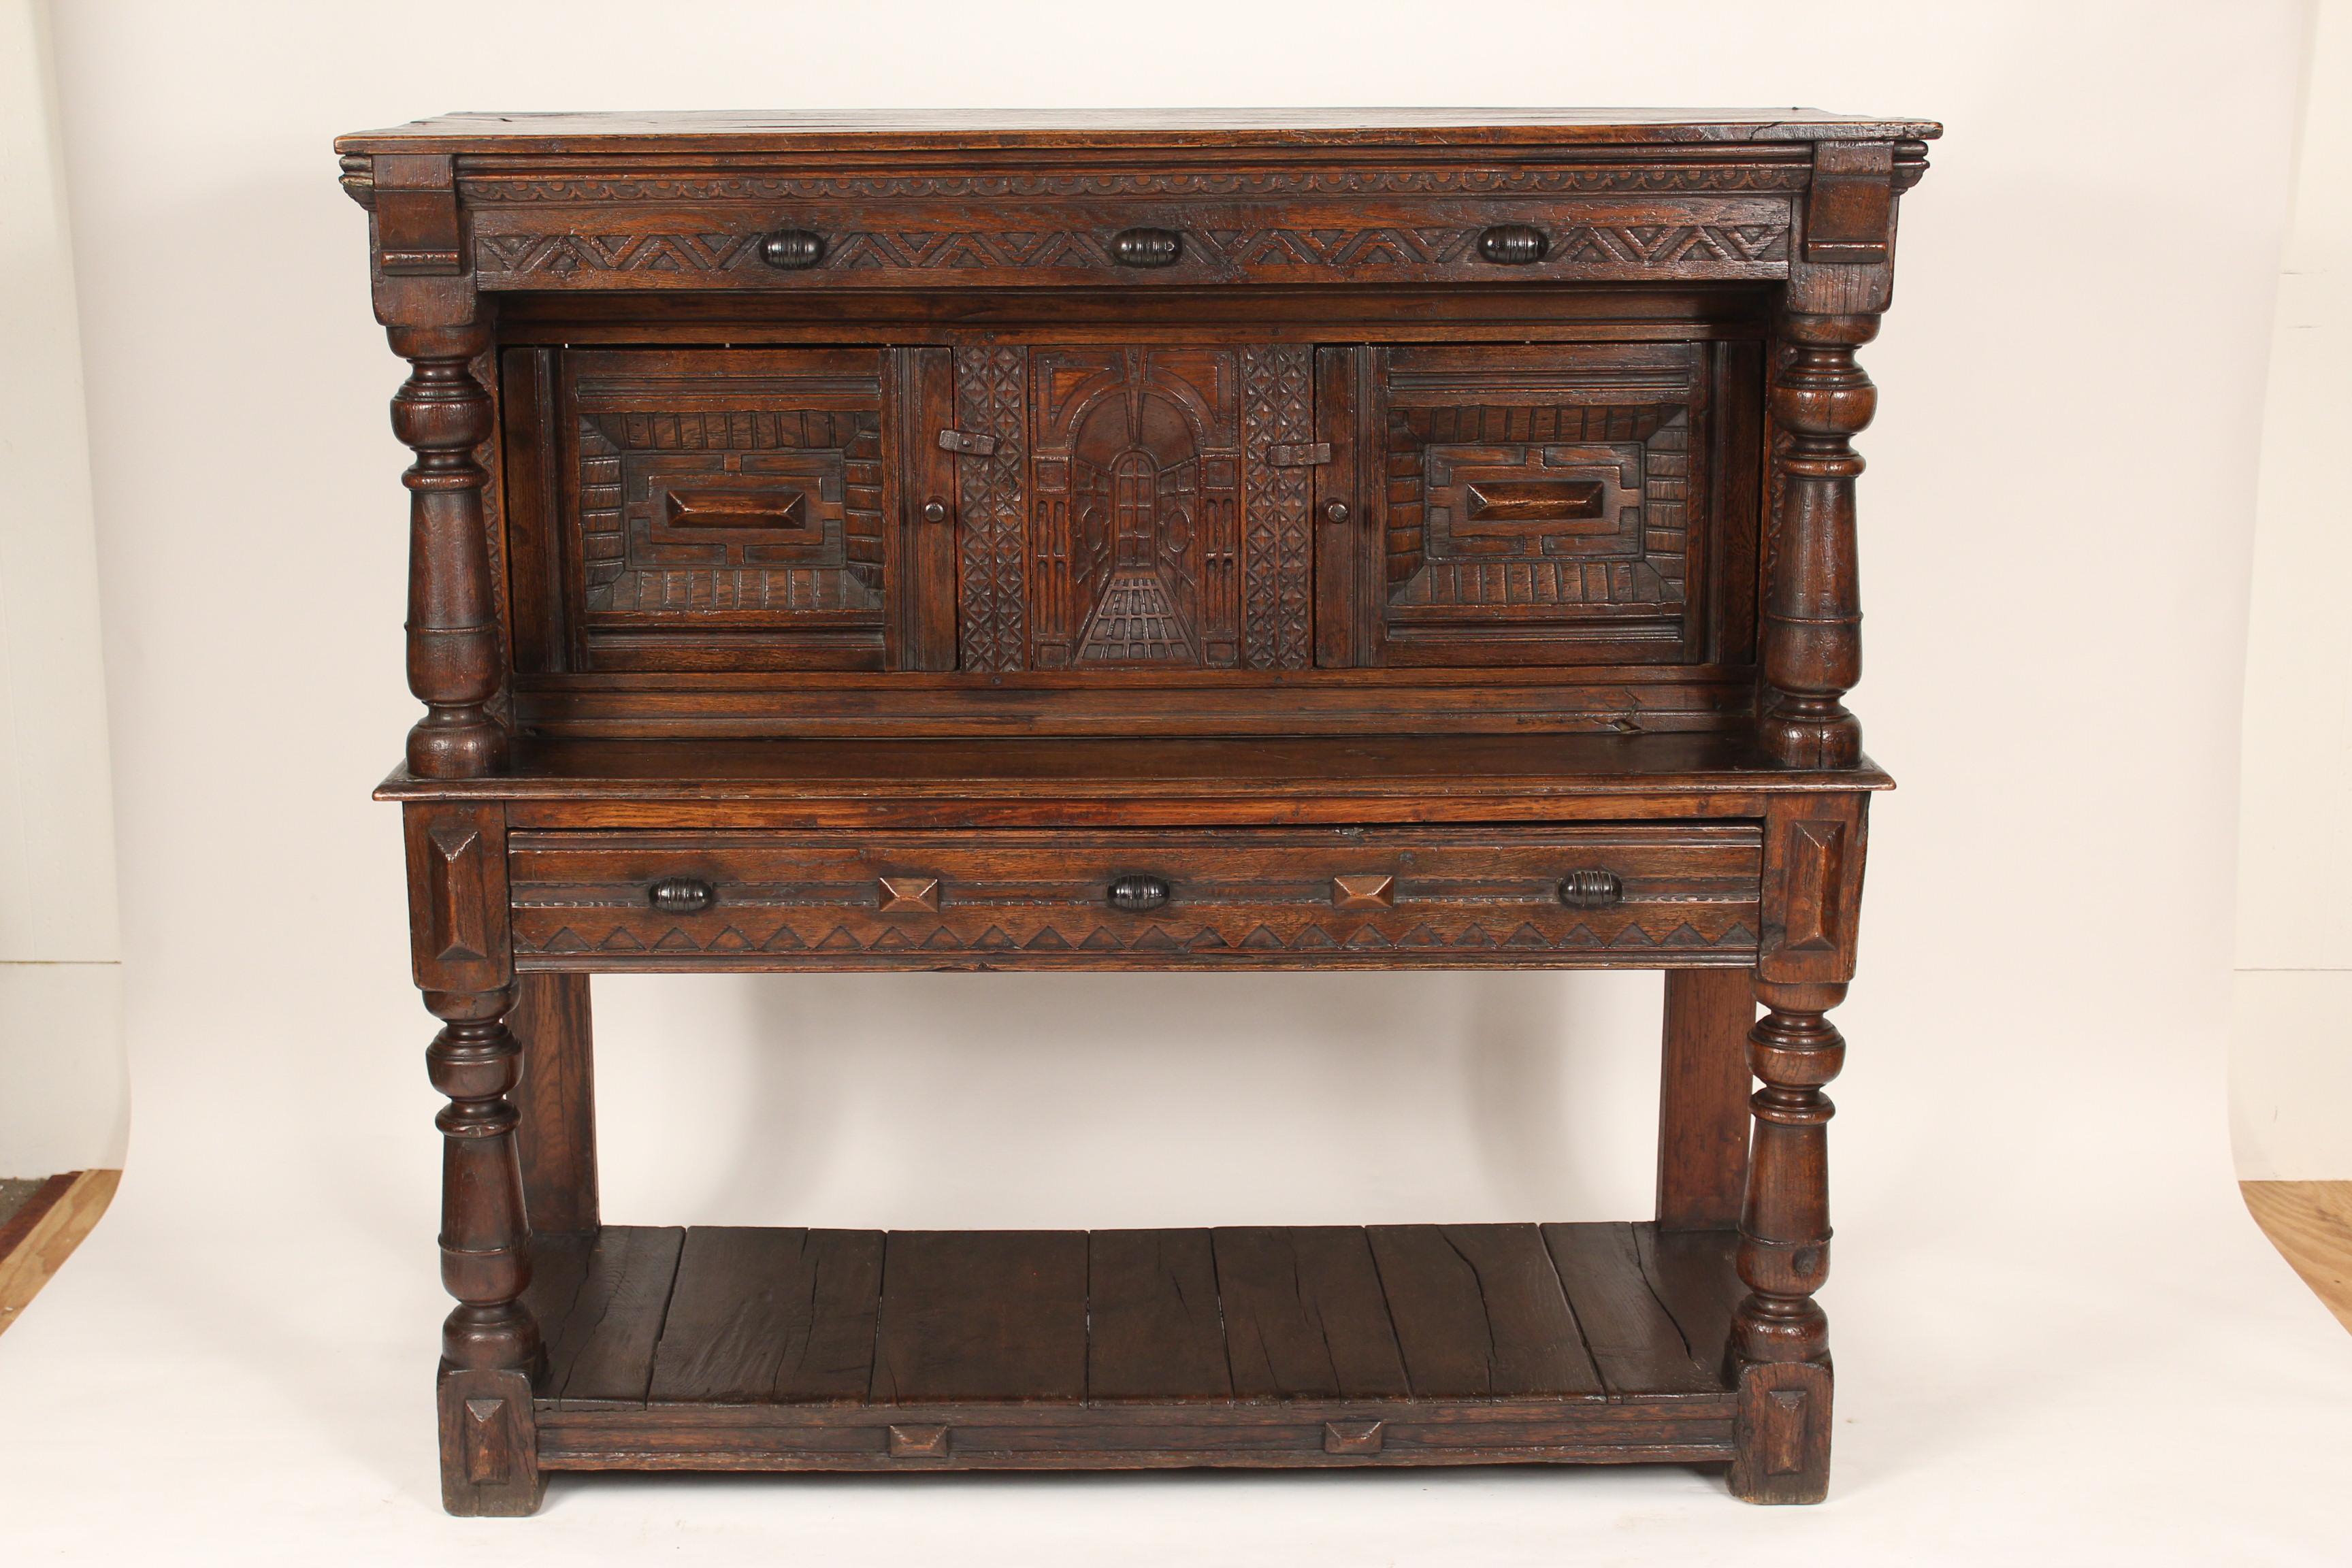 18th century oak court cupboard. With interesting carved central stationary panel flanked by two carved doors. Provenance: Probably Carl Yeakel Antiques, Laguna Beach.